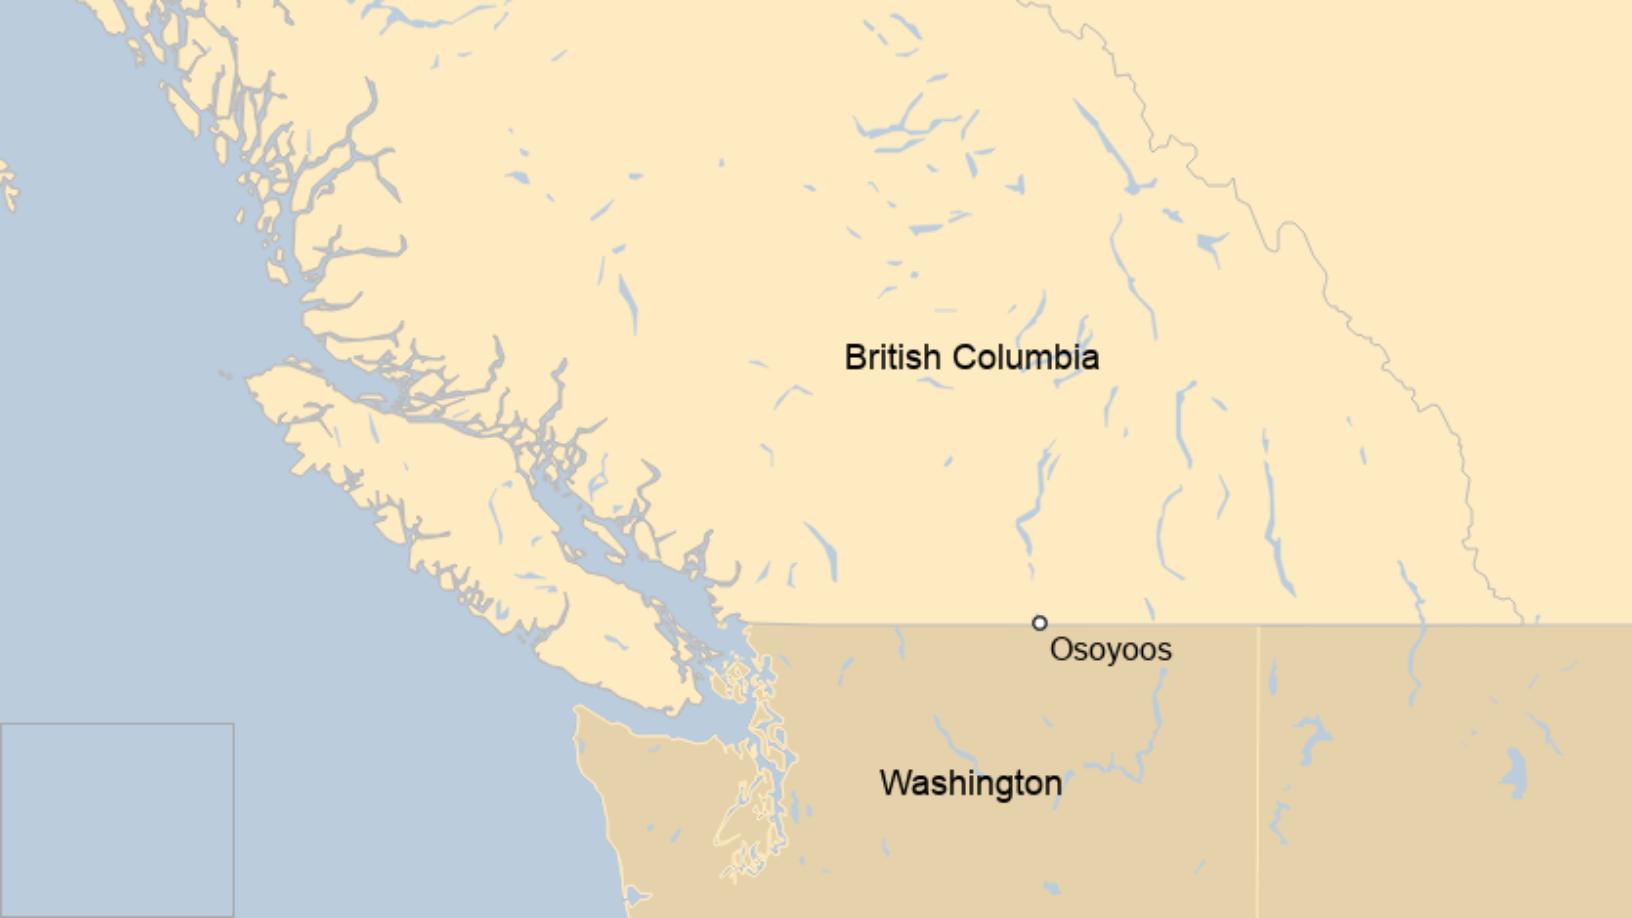 Map: Osoyoos and Oroville on the US-Canada border